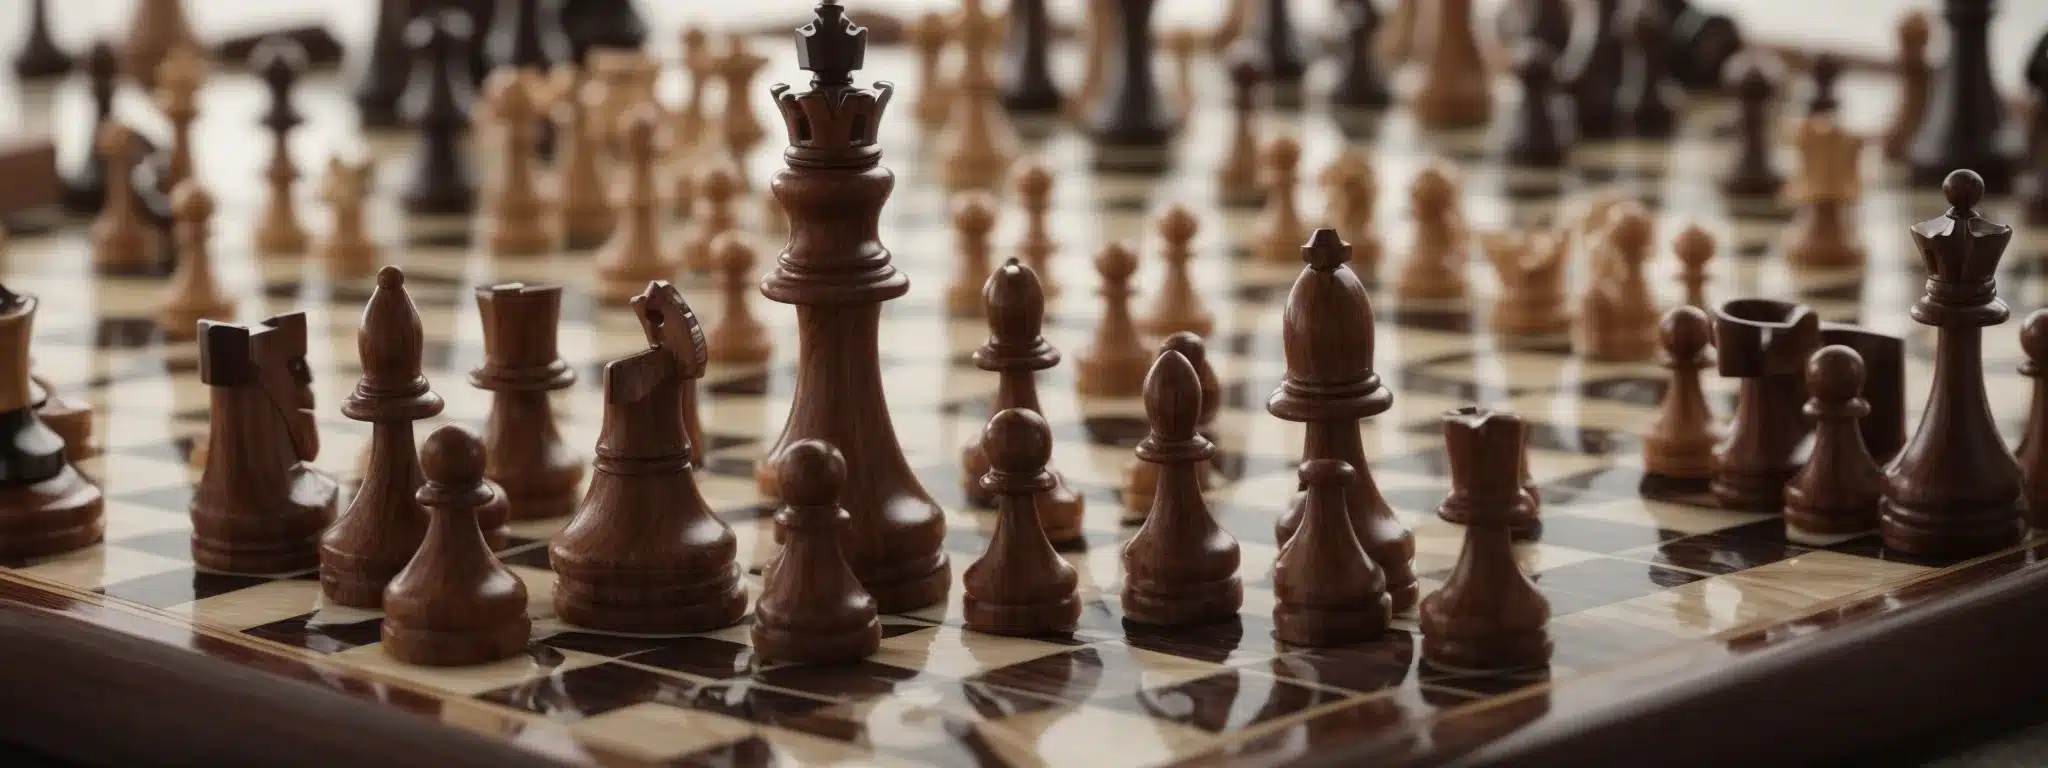 A Chessboard With Pieces Strategically Positioned, Symbolizing The Analytical Planning Of Market Competition.